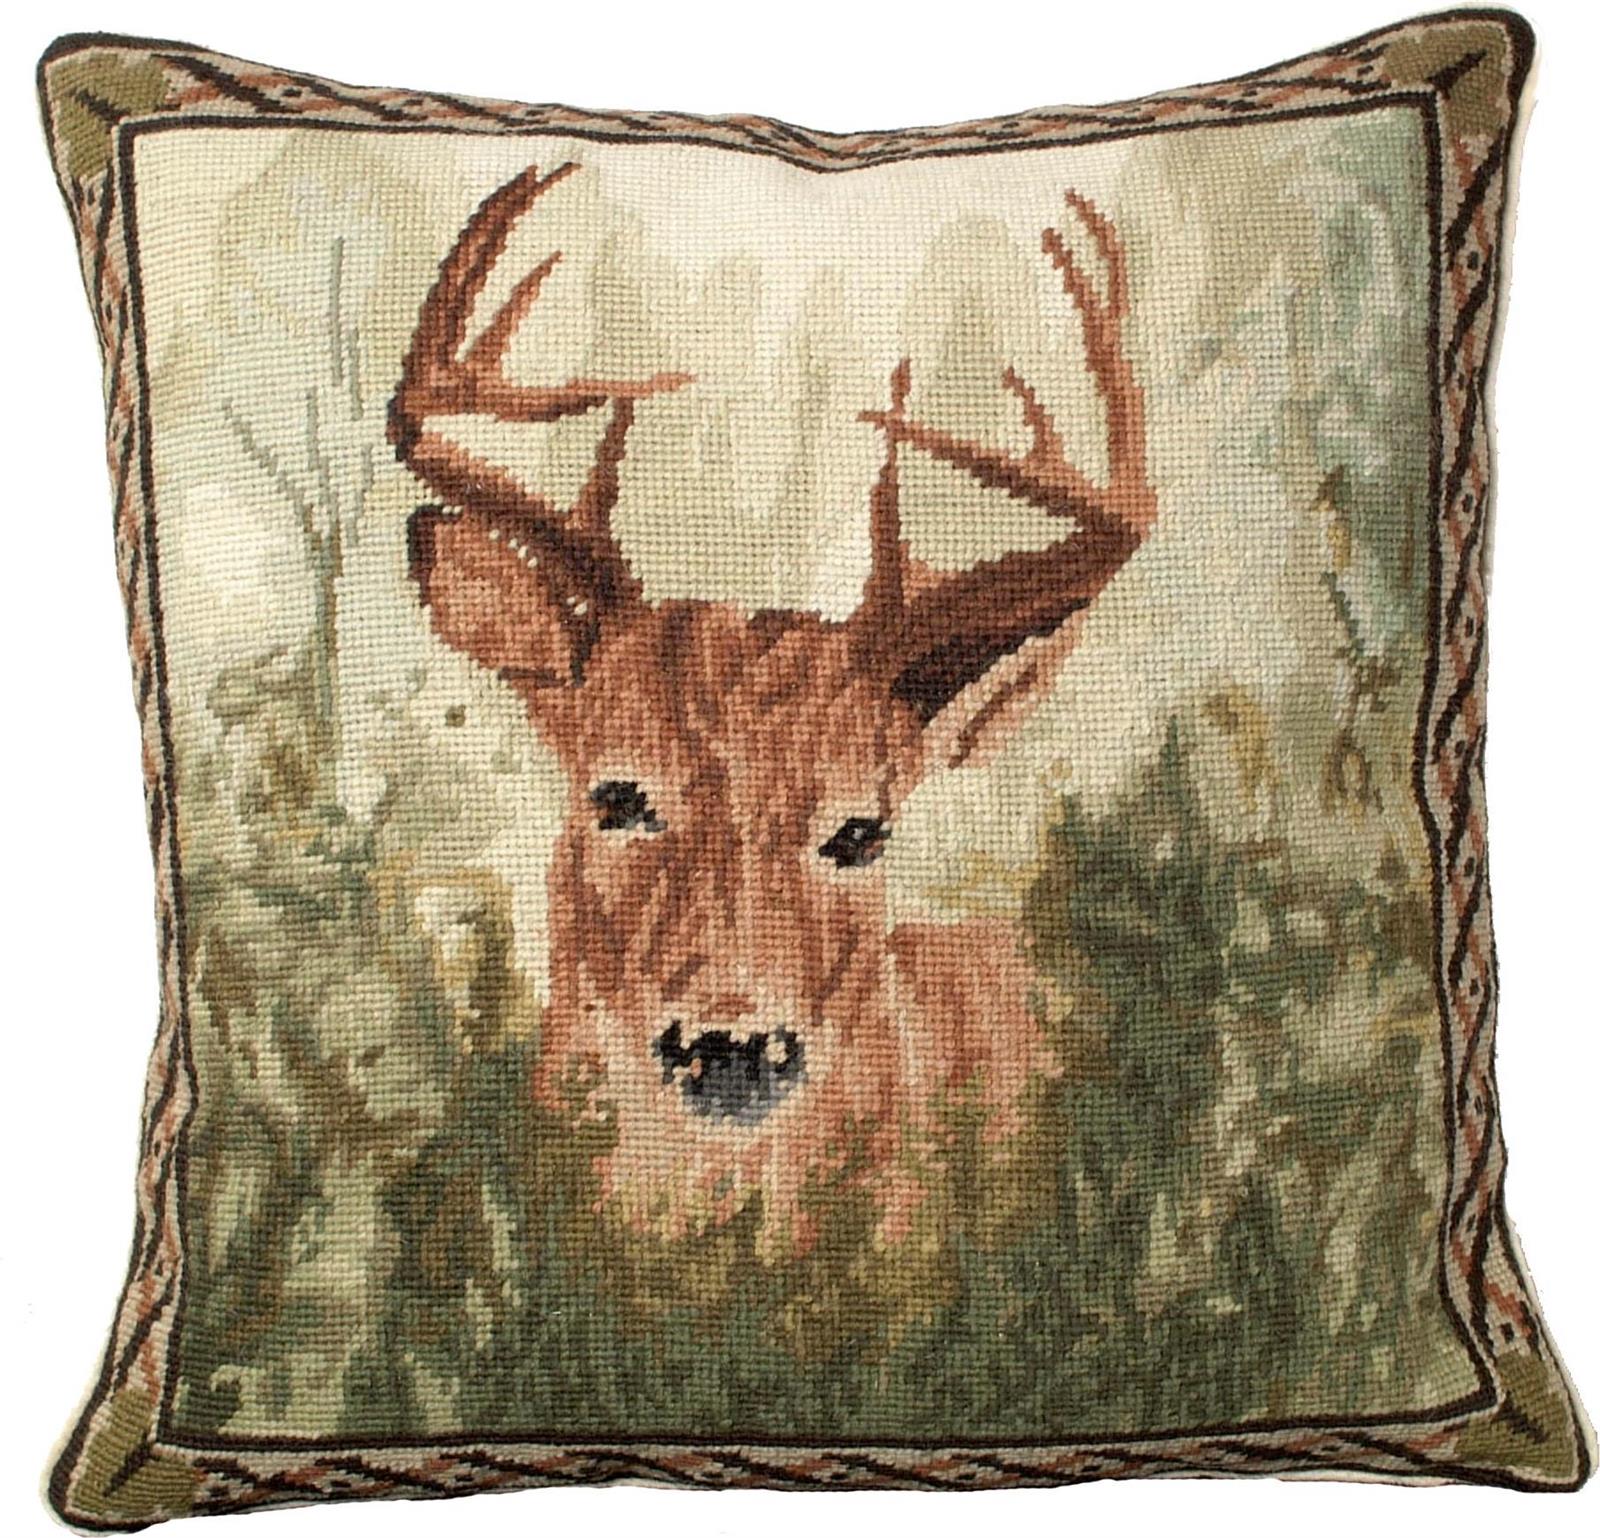 Throw Pillow Needlepoint Stag in Forest 18x18 Beige Wool Cotton Velvet-Image 1